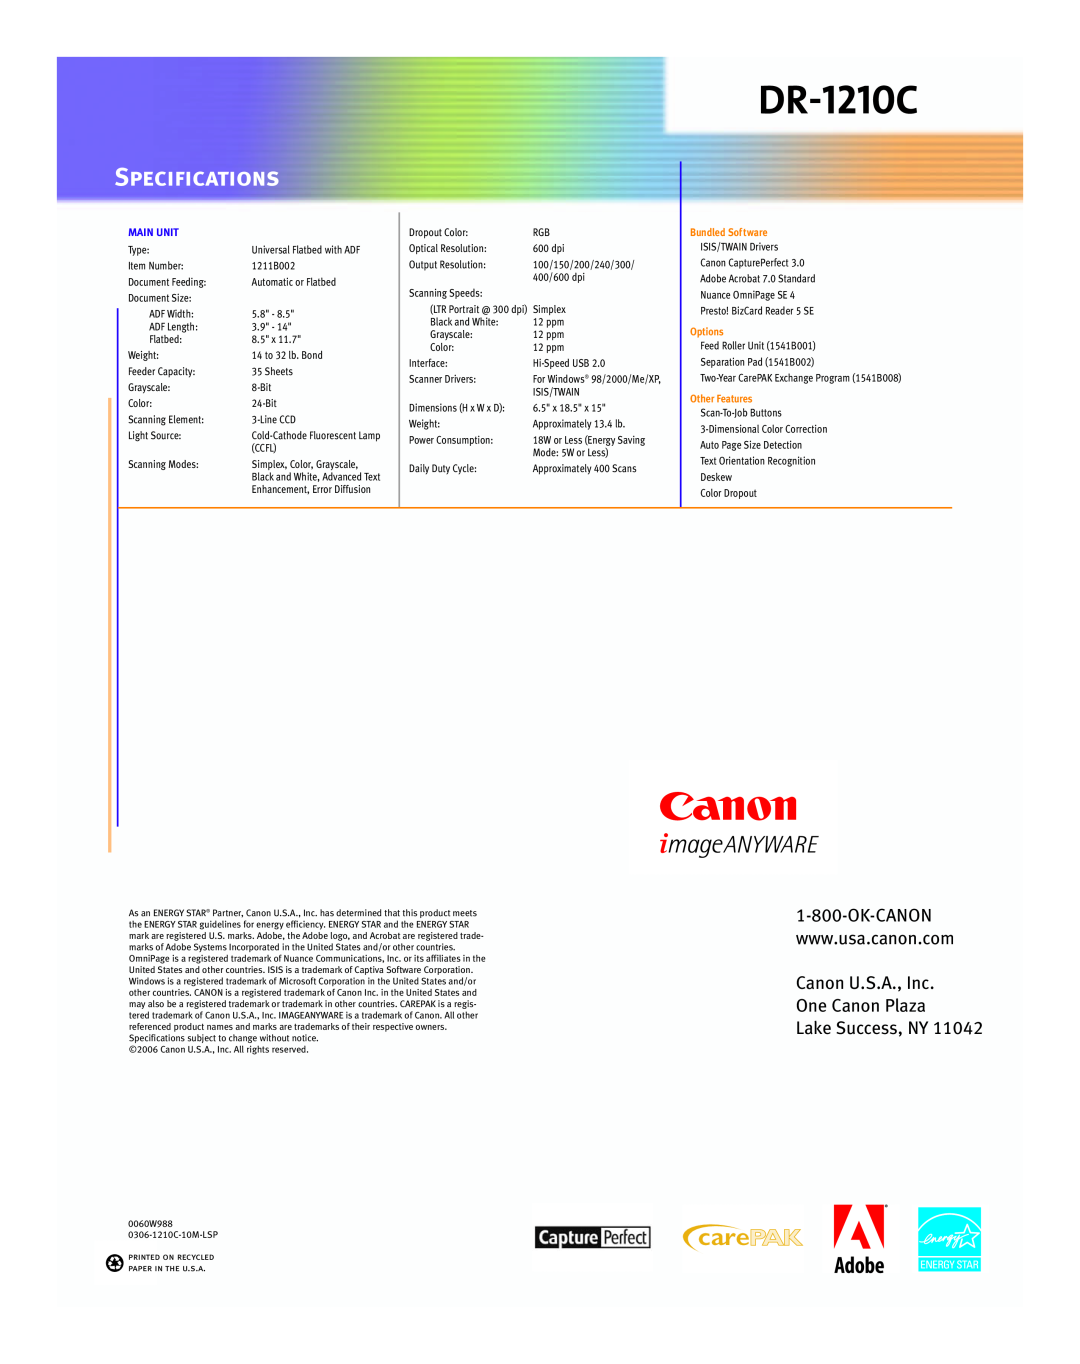 Cannon DR-1210C Specifications, Canon U.S.A., Inc One Canon Plaza Lake Success, NY, Main Unit, Bundled Software, Options 